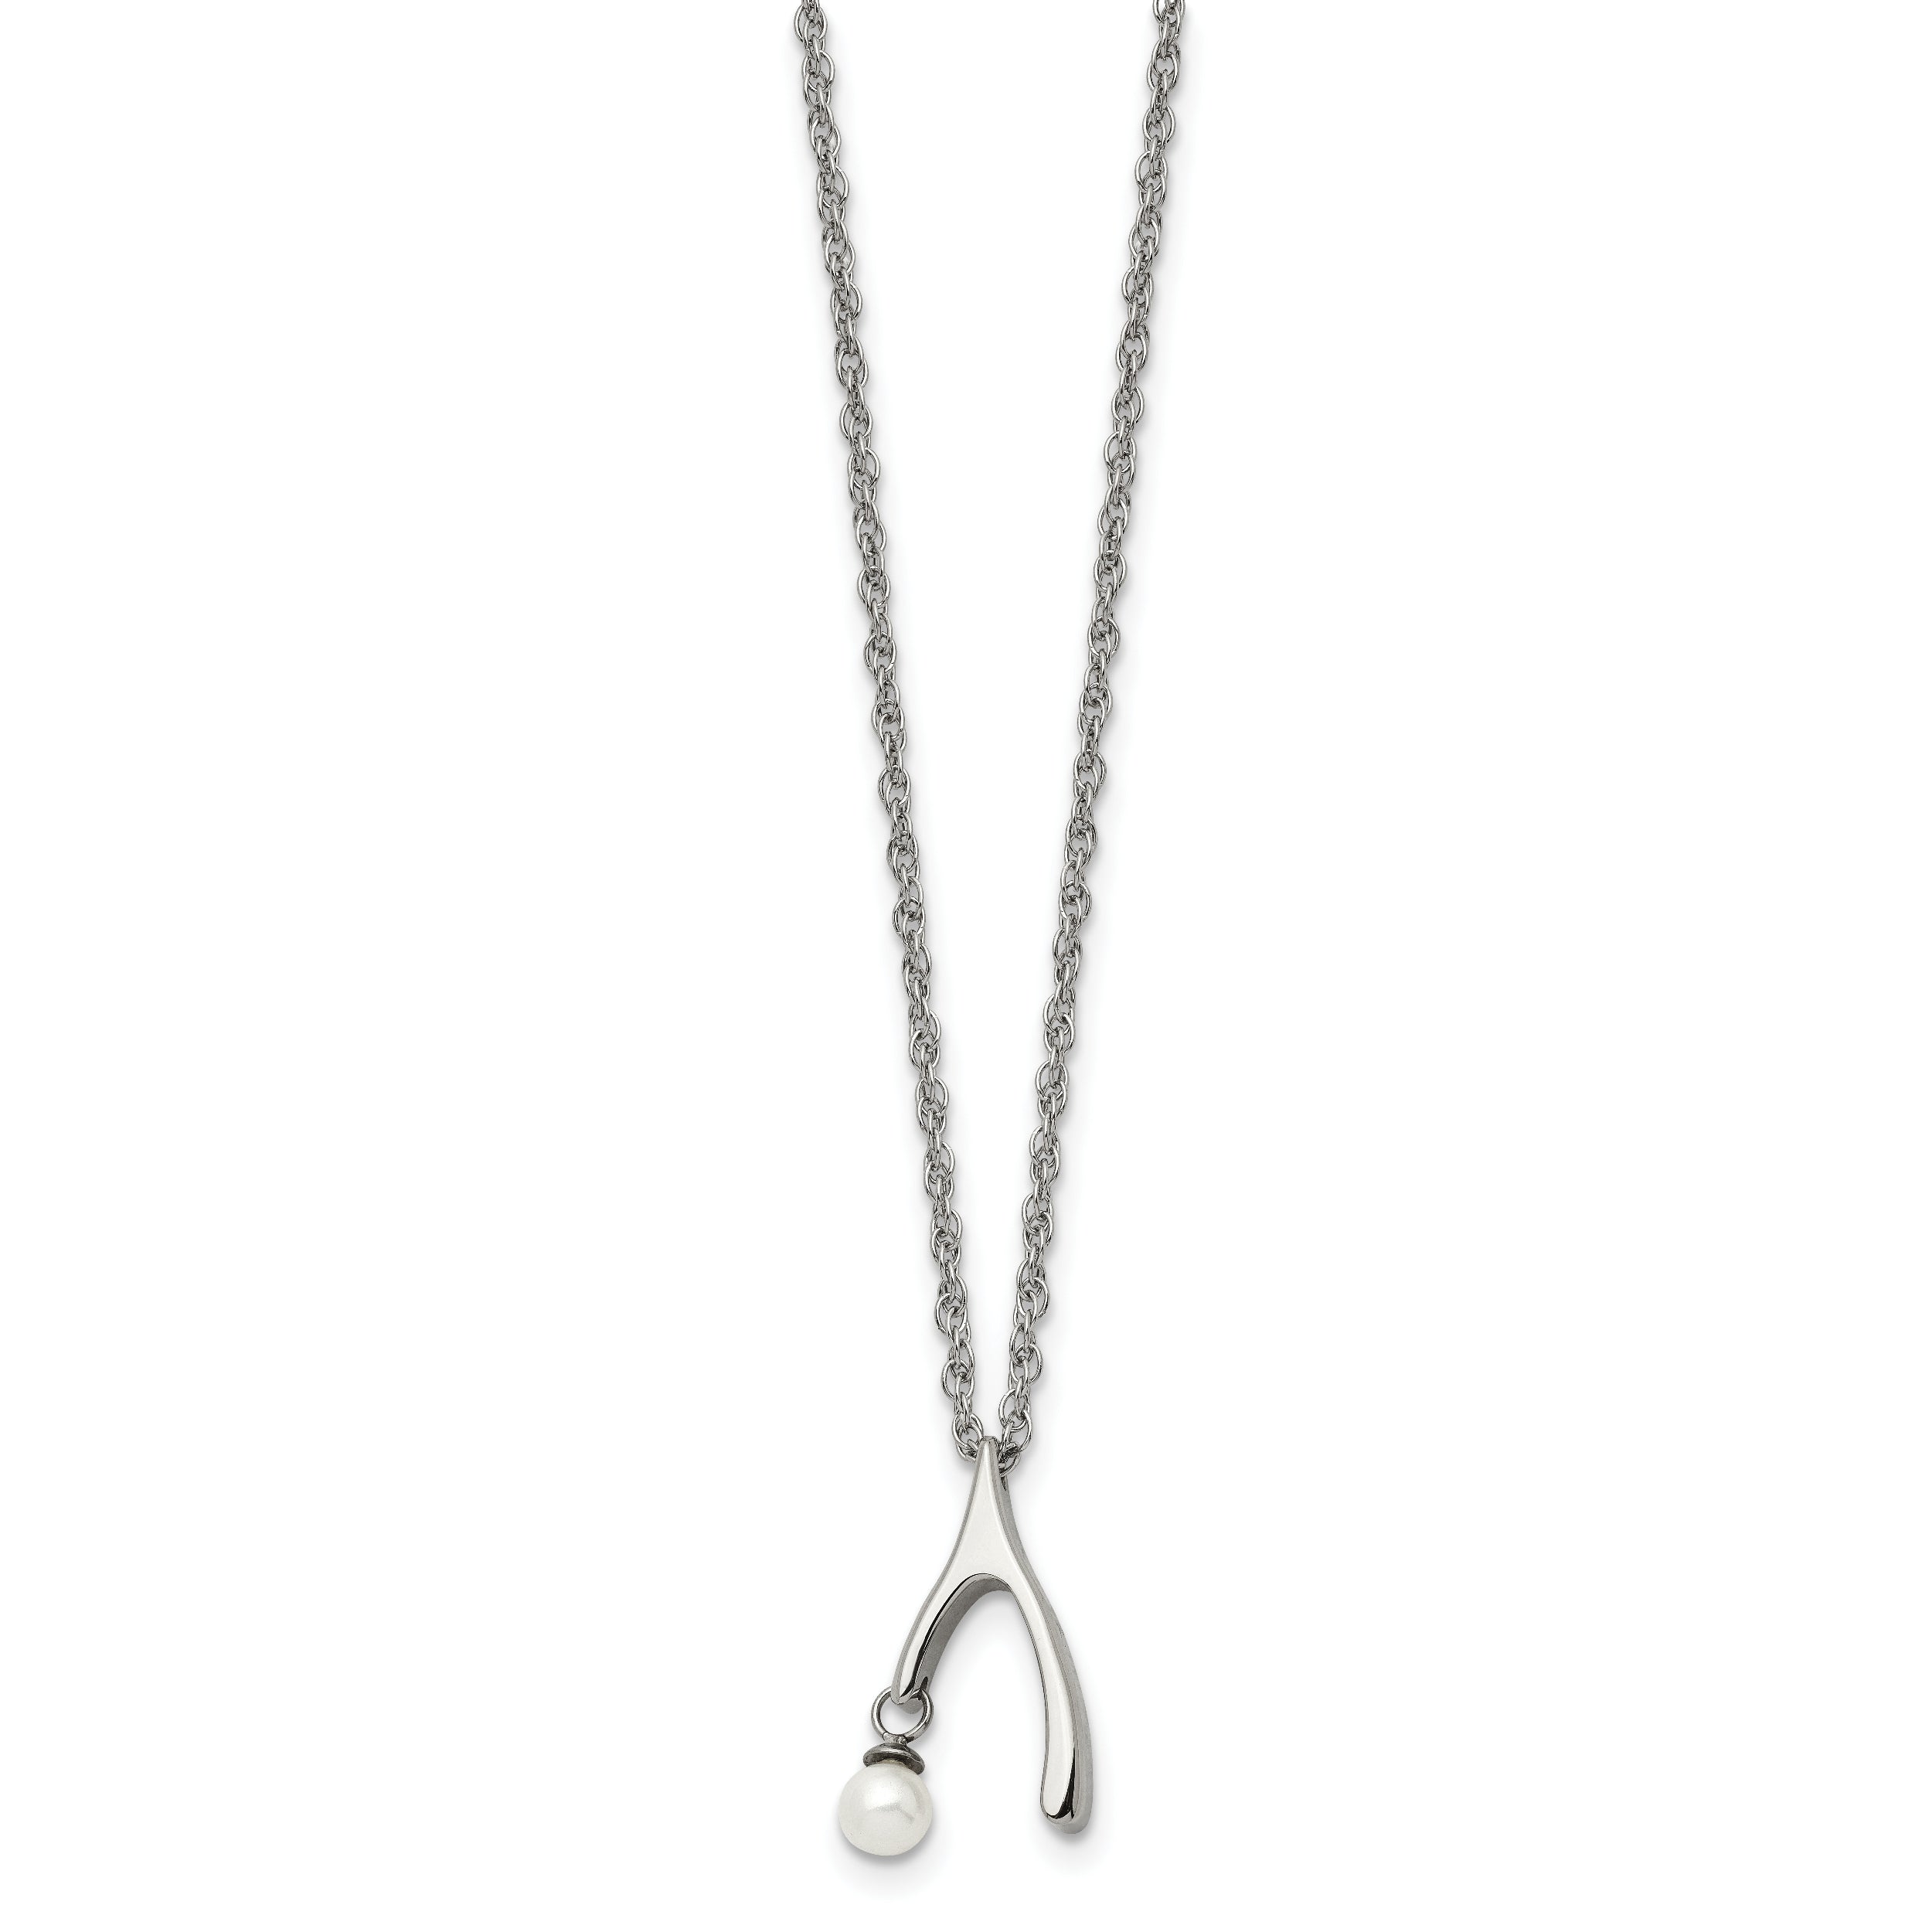 Stainless Steel Polished Wishbone Imitation Pearl 16in Necklace